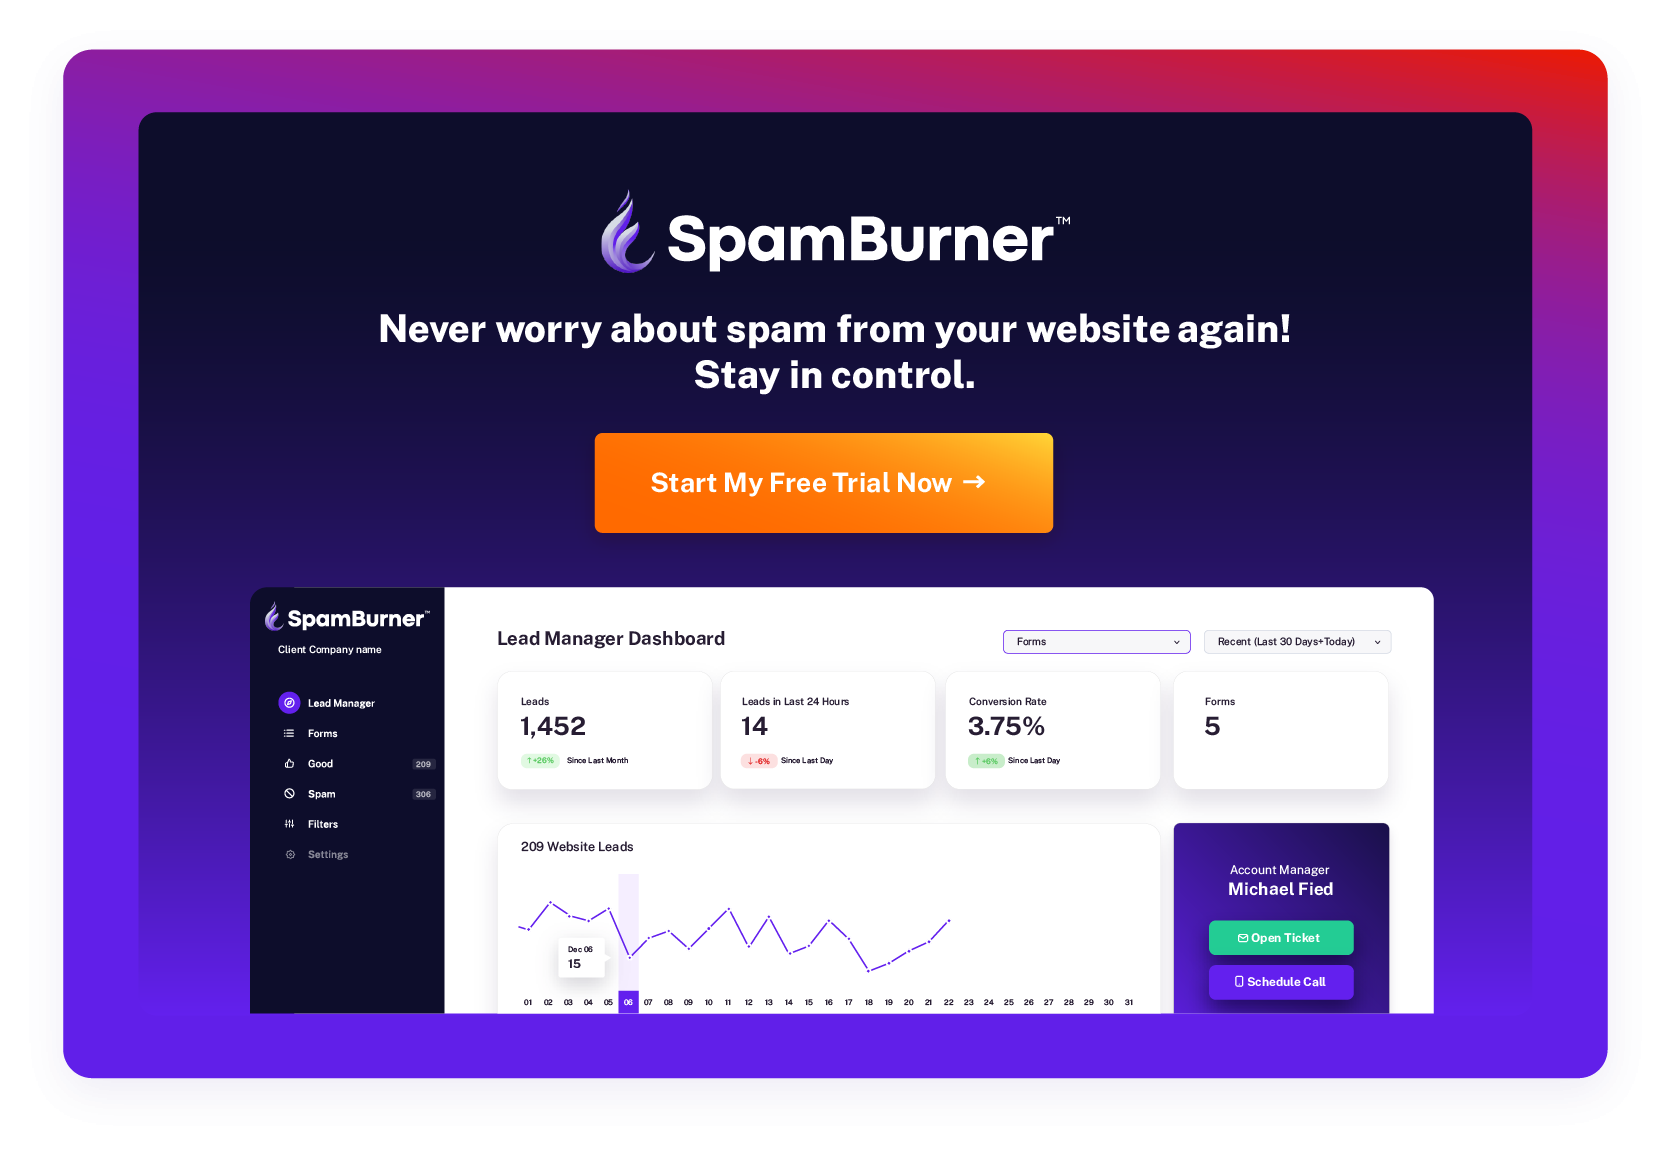 Remove Spam Form Submissions & Manage Website Leads With One Simple Dashboard